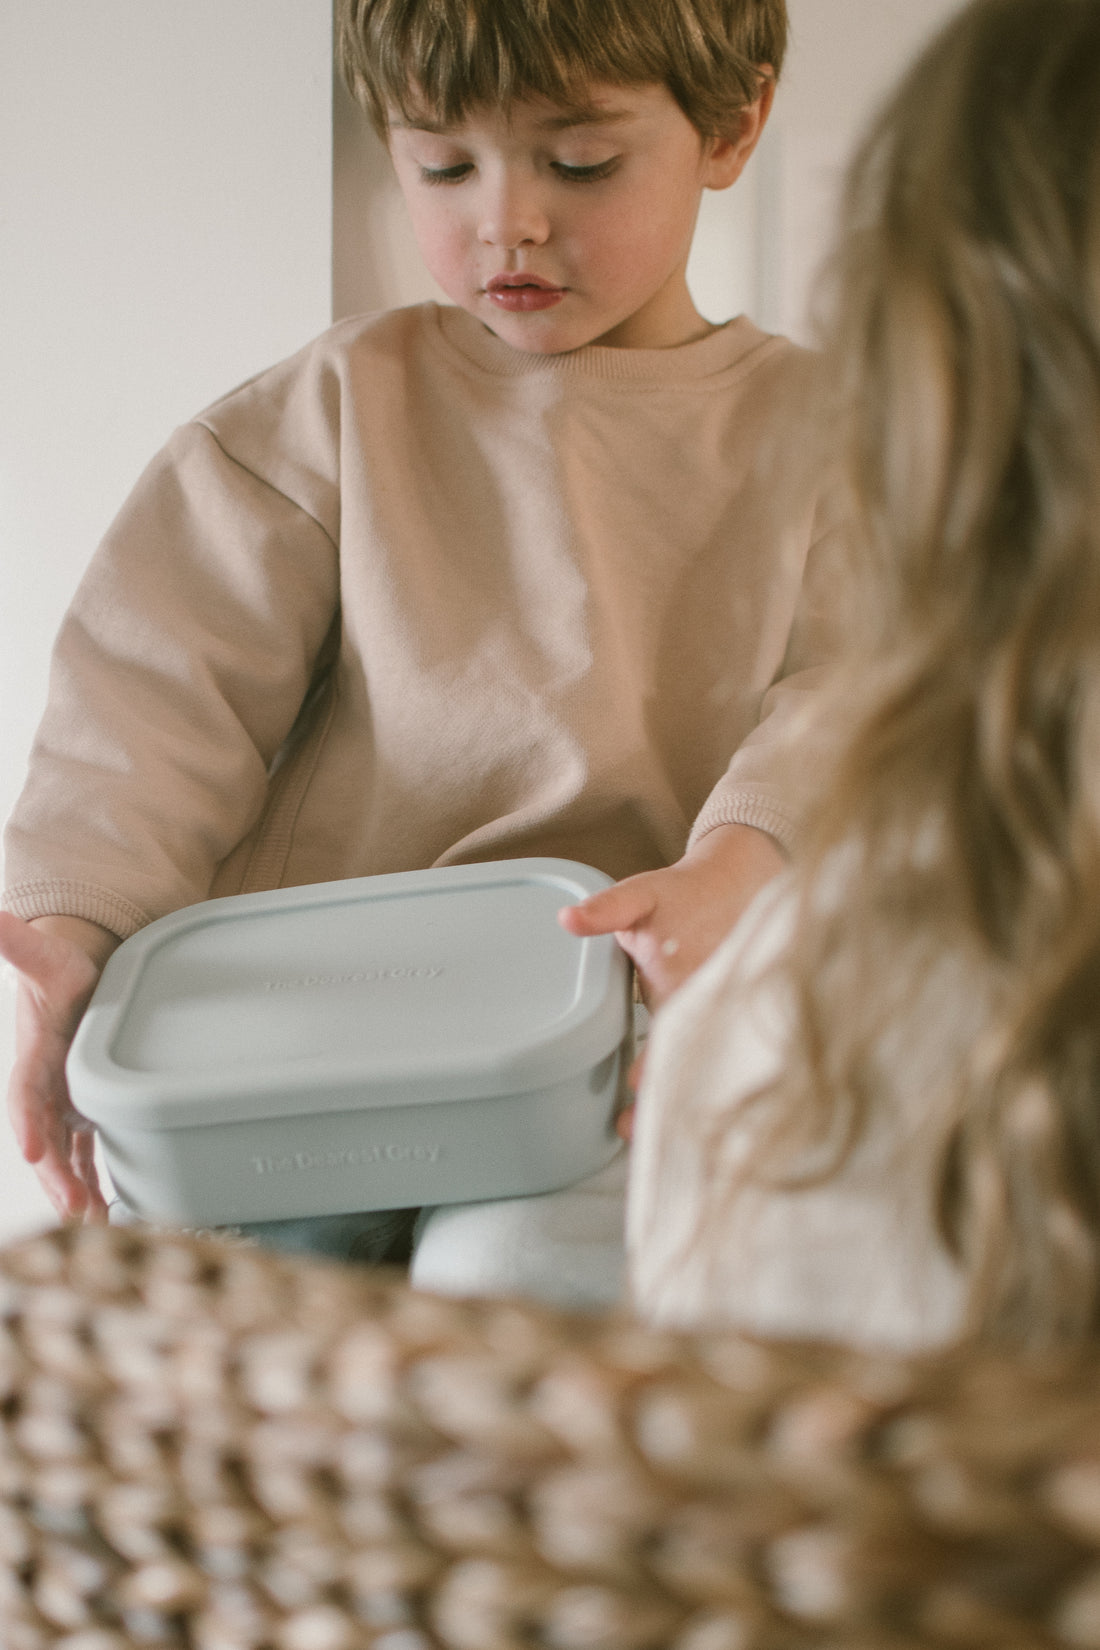 The Dearest Grey - Divided Silicone Bento Lunch Box